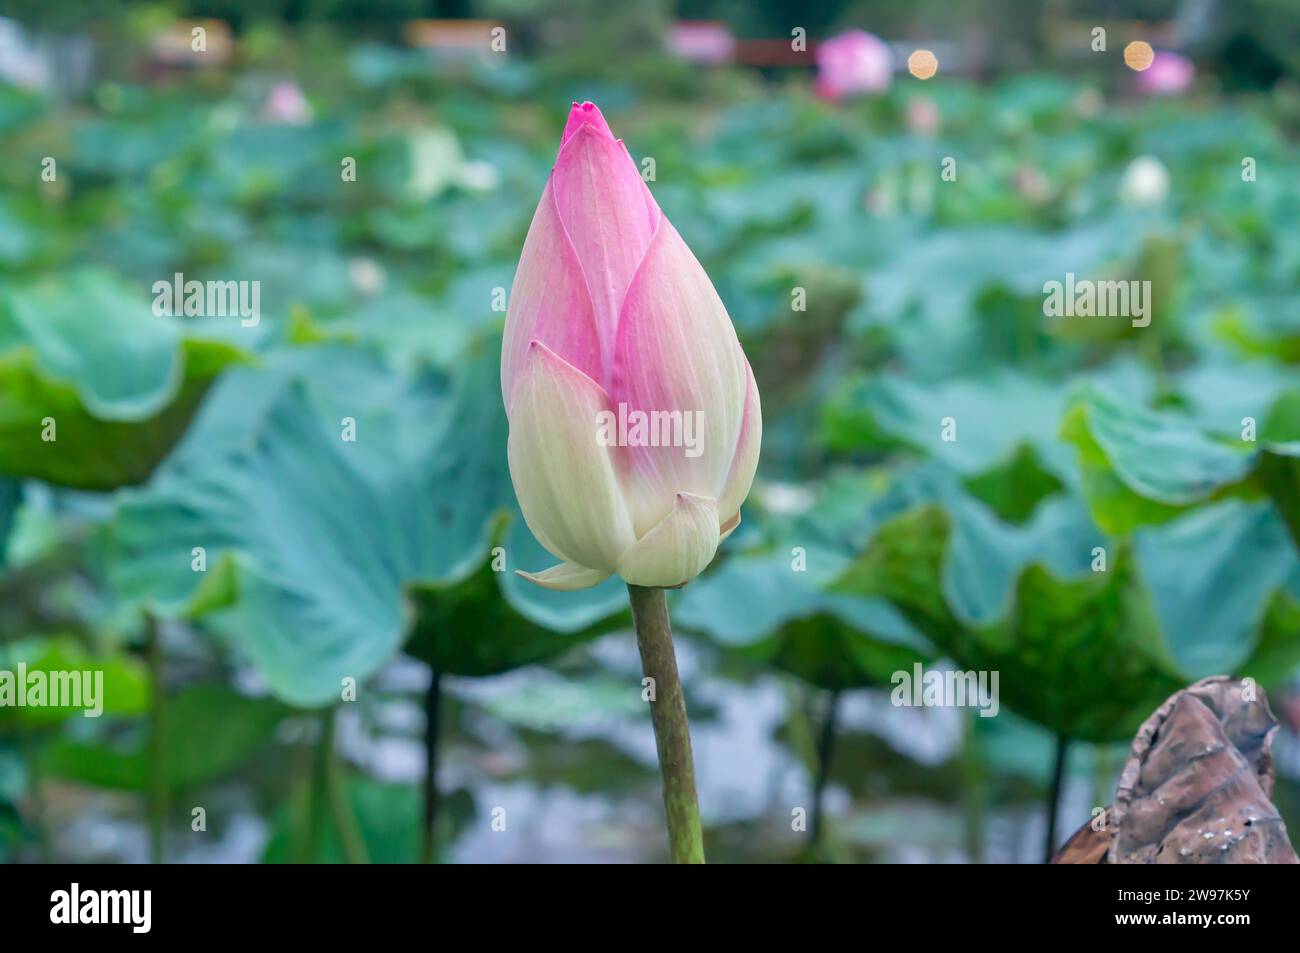 Single beautiful pink waterlily bud in natural pond was closely taken with blurred green leaves background in soft light. Big pink lotus bud or flower Stock Photo